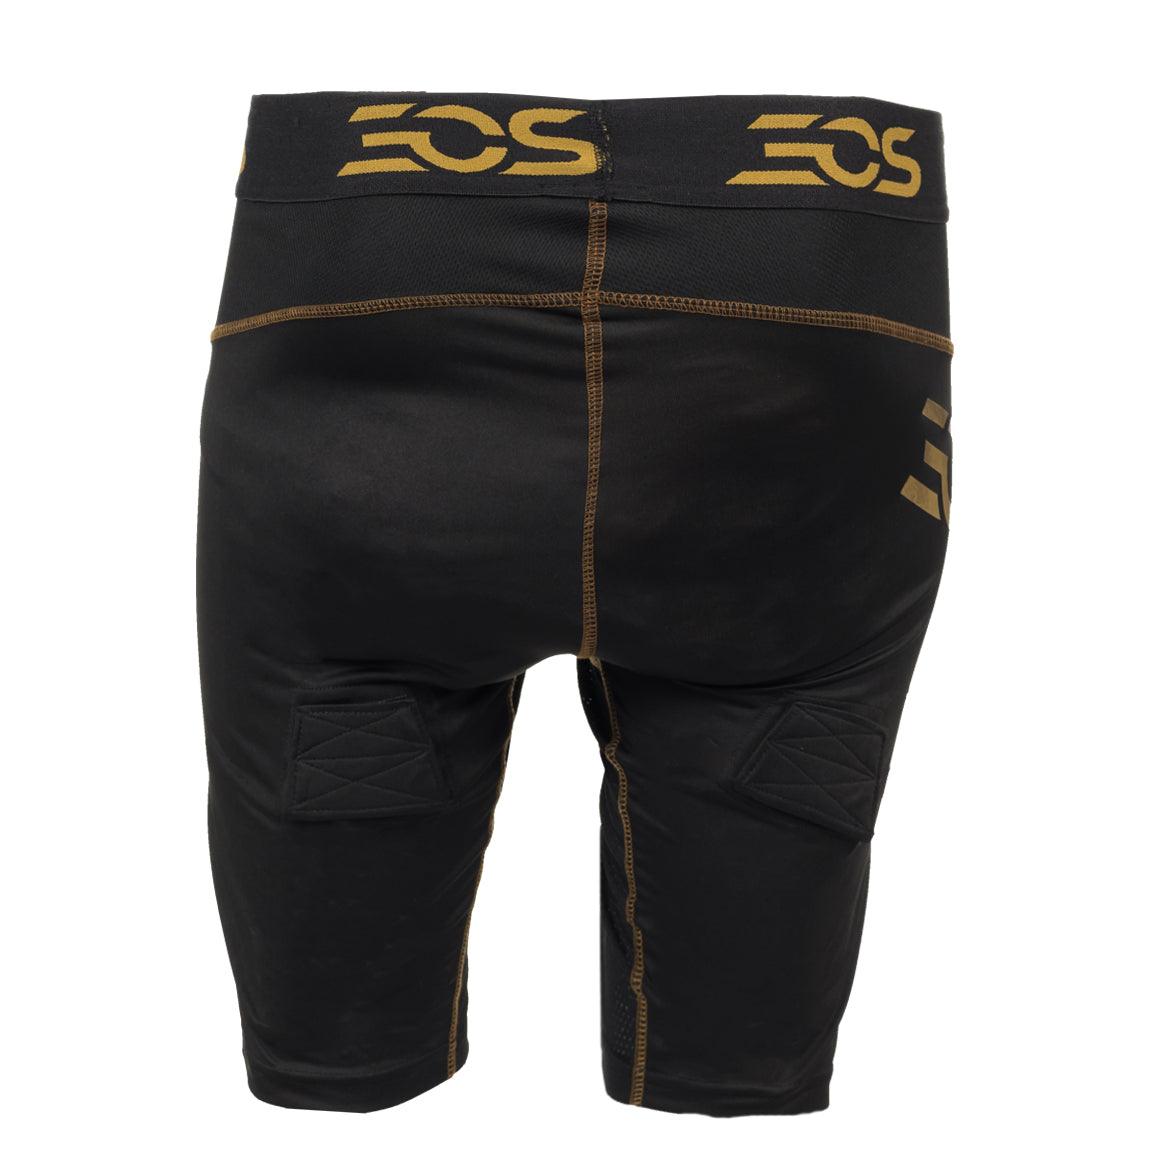 EOS 50 Boy's Compression Baselayer Shorts - Youth - Sports Excellence